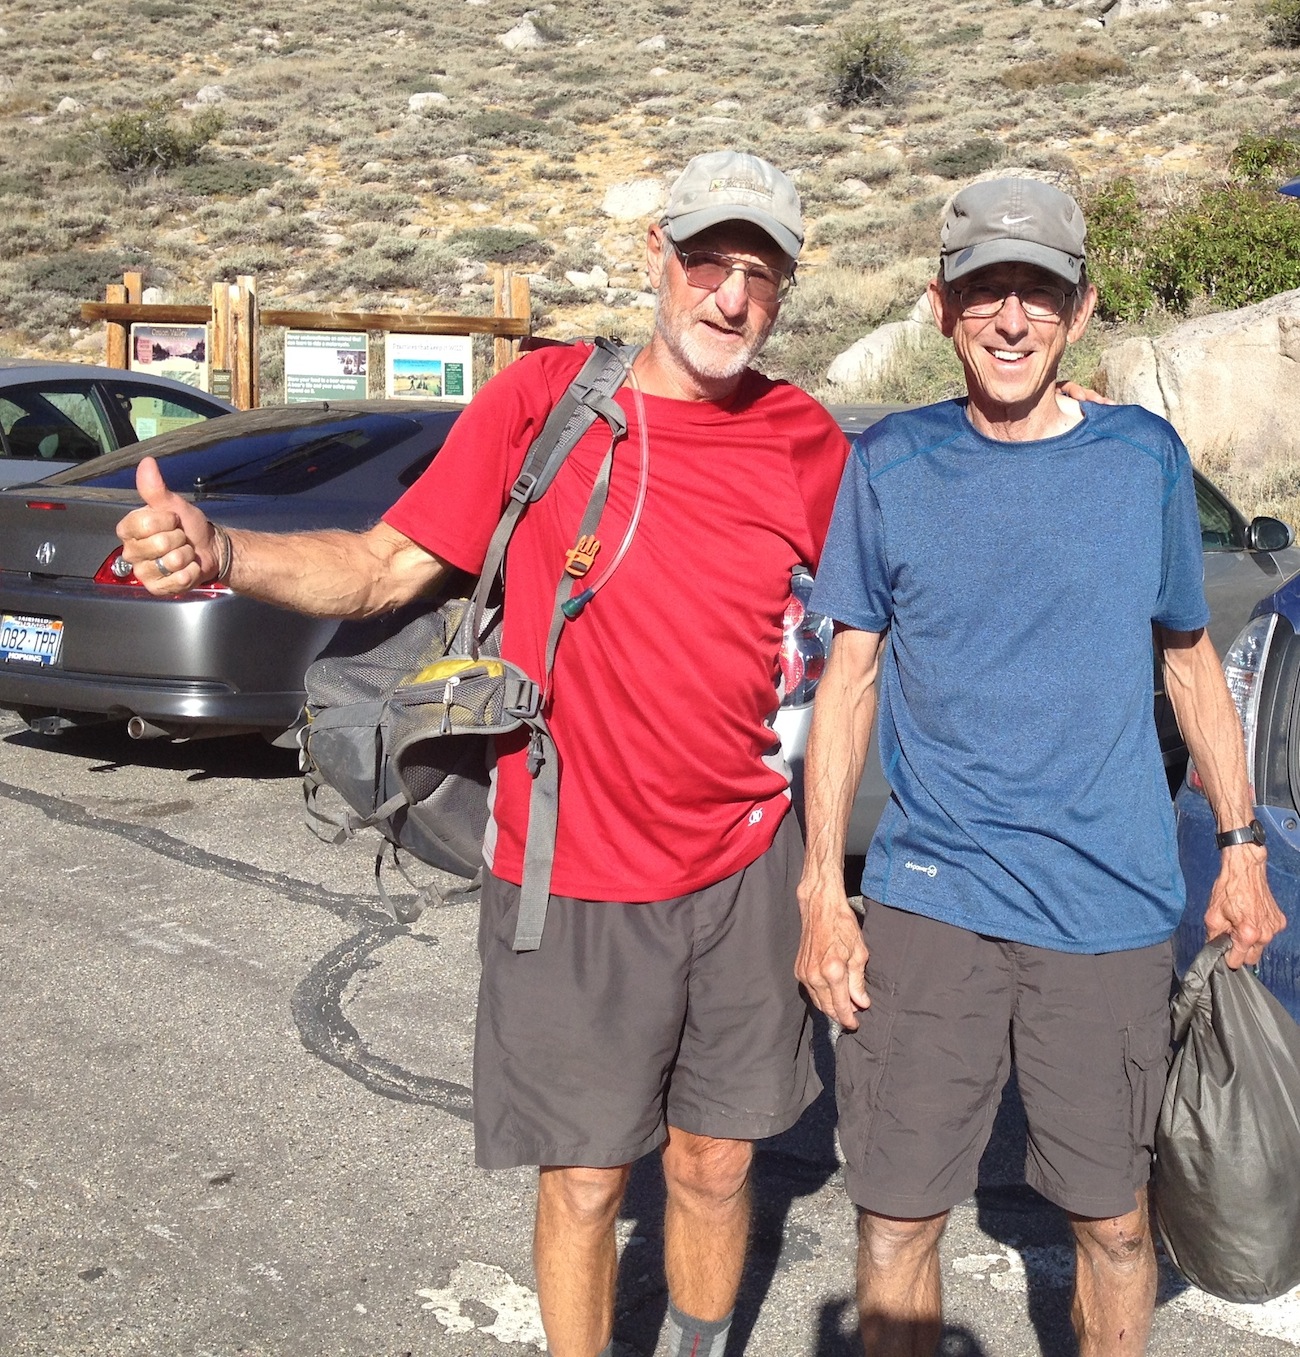 Dick and Larry from Reno on their way back up Kearsarge Pass and then on to Mt. Whitney. If they get bored they will bag a few more peaks along the way.